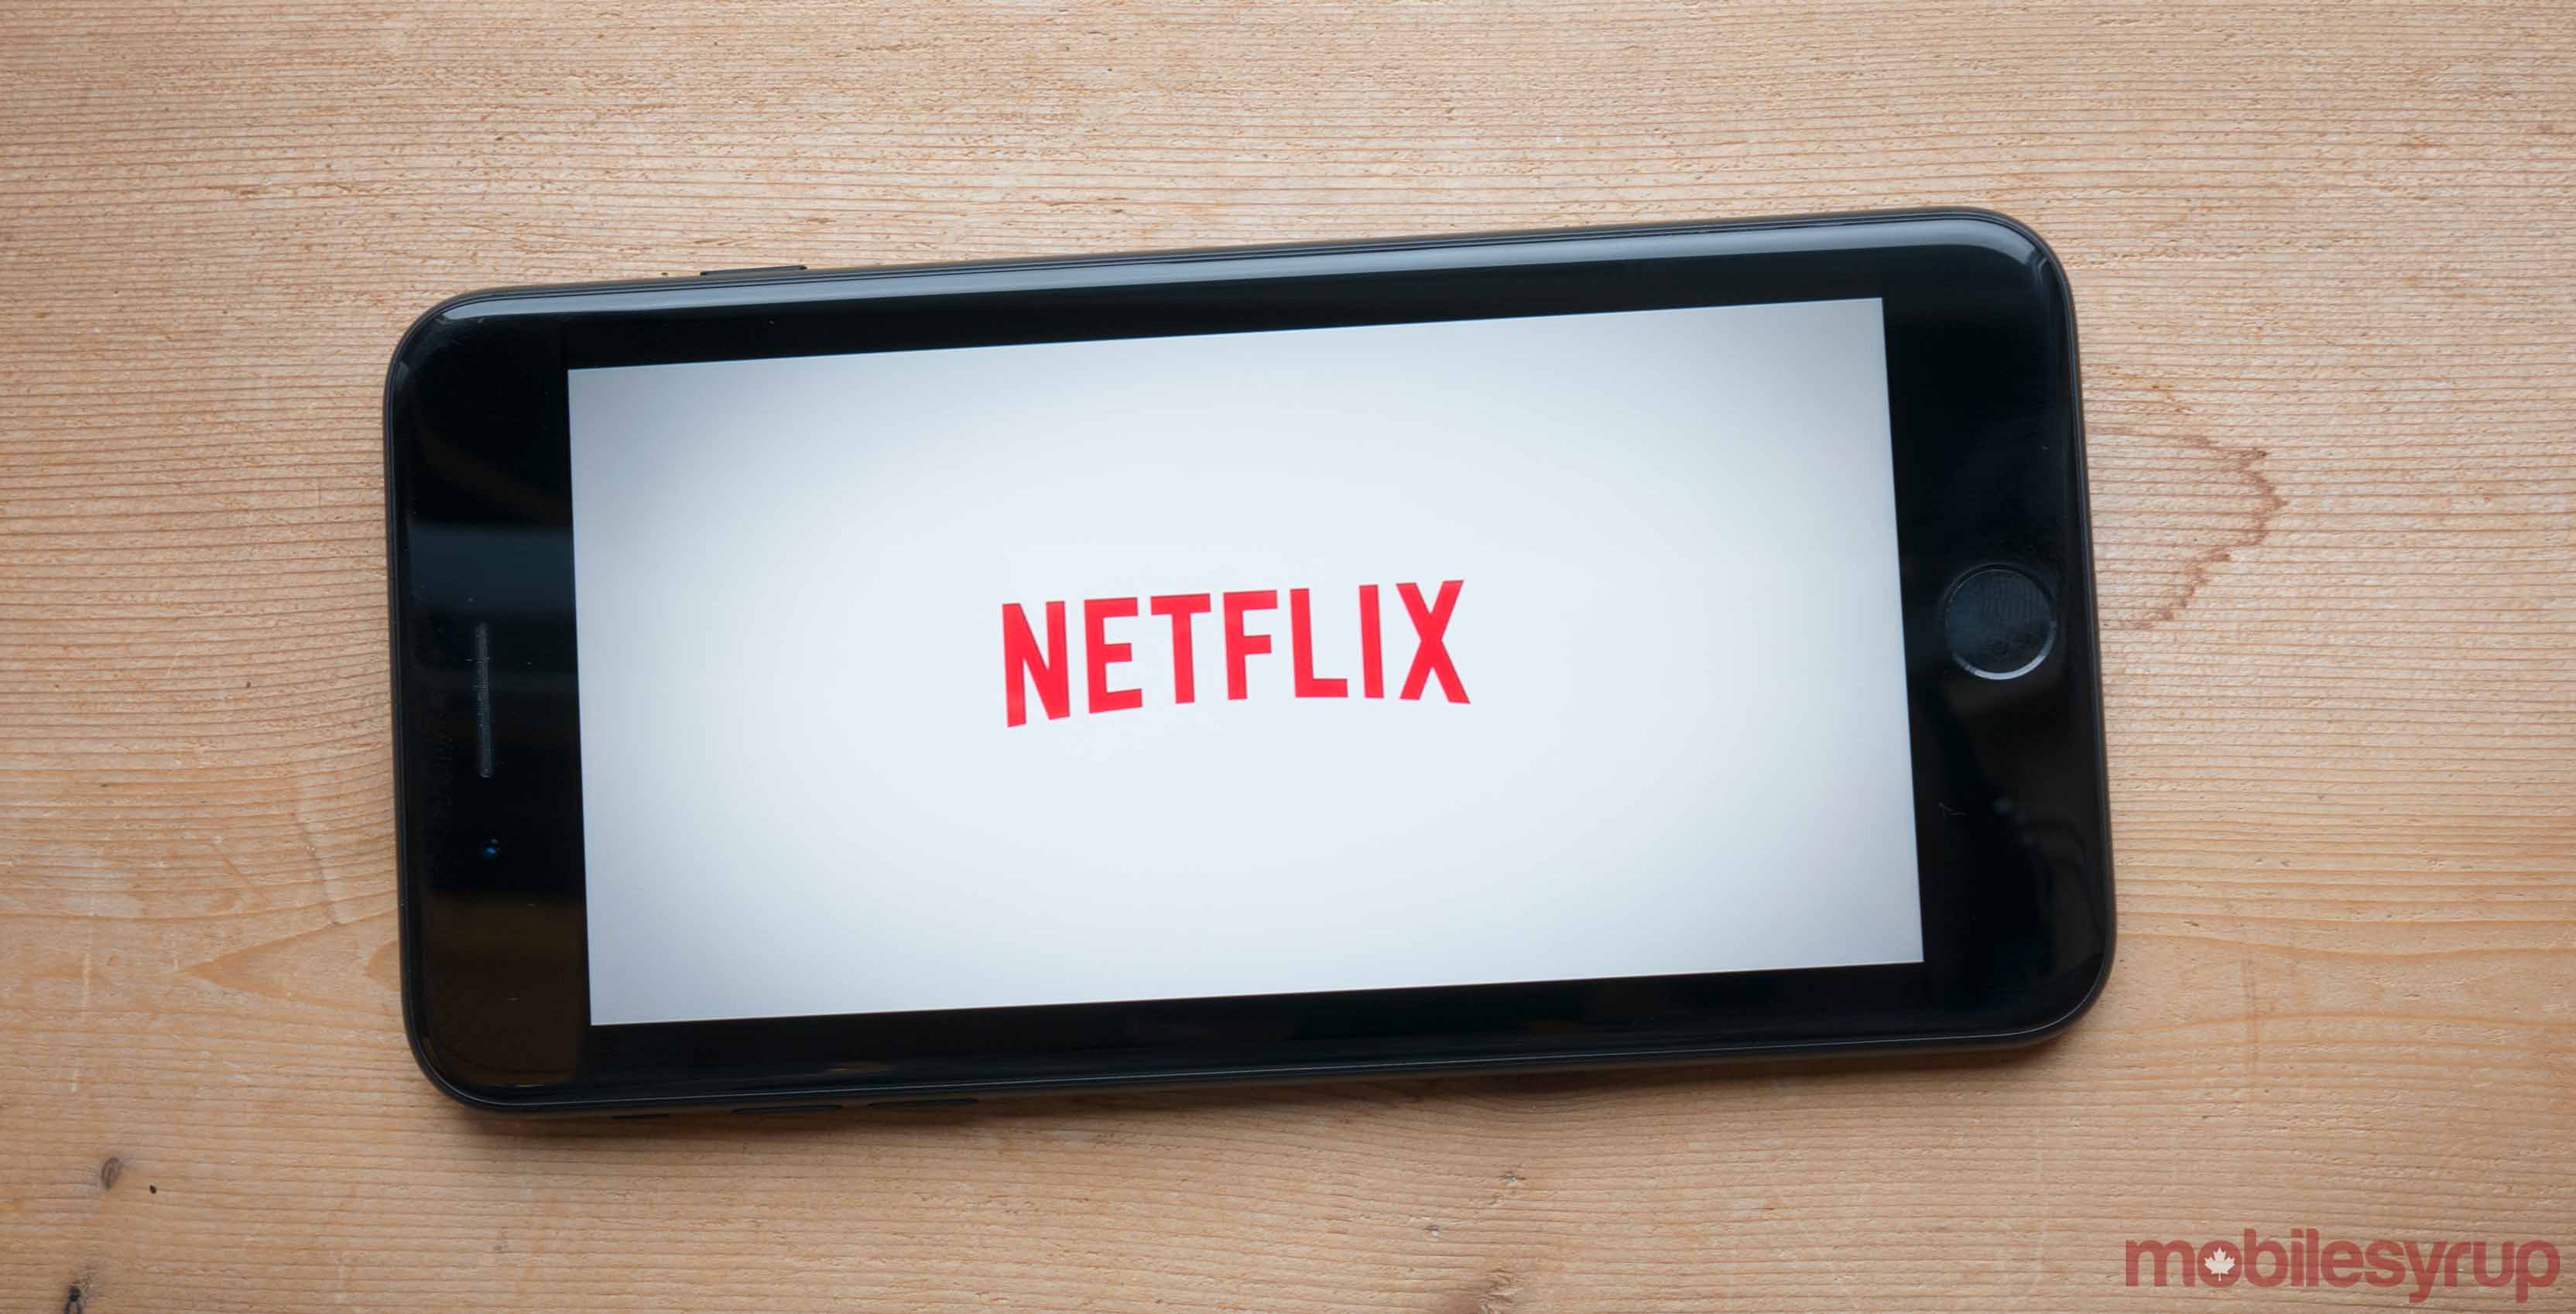 Netflix iPhone Logo - Check out these Netflix Originals coming to Canada in September